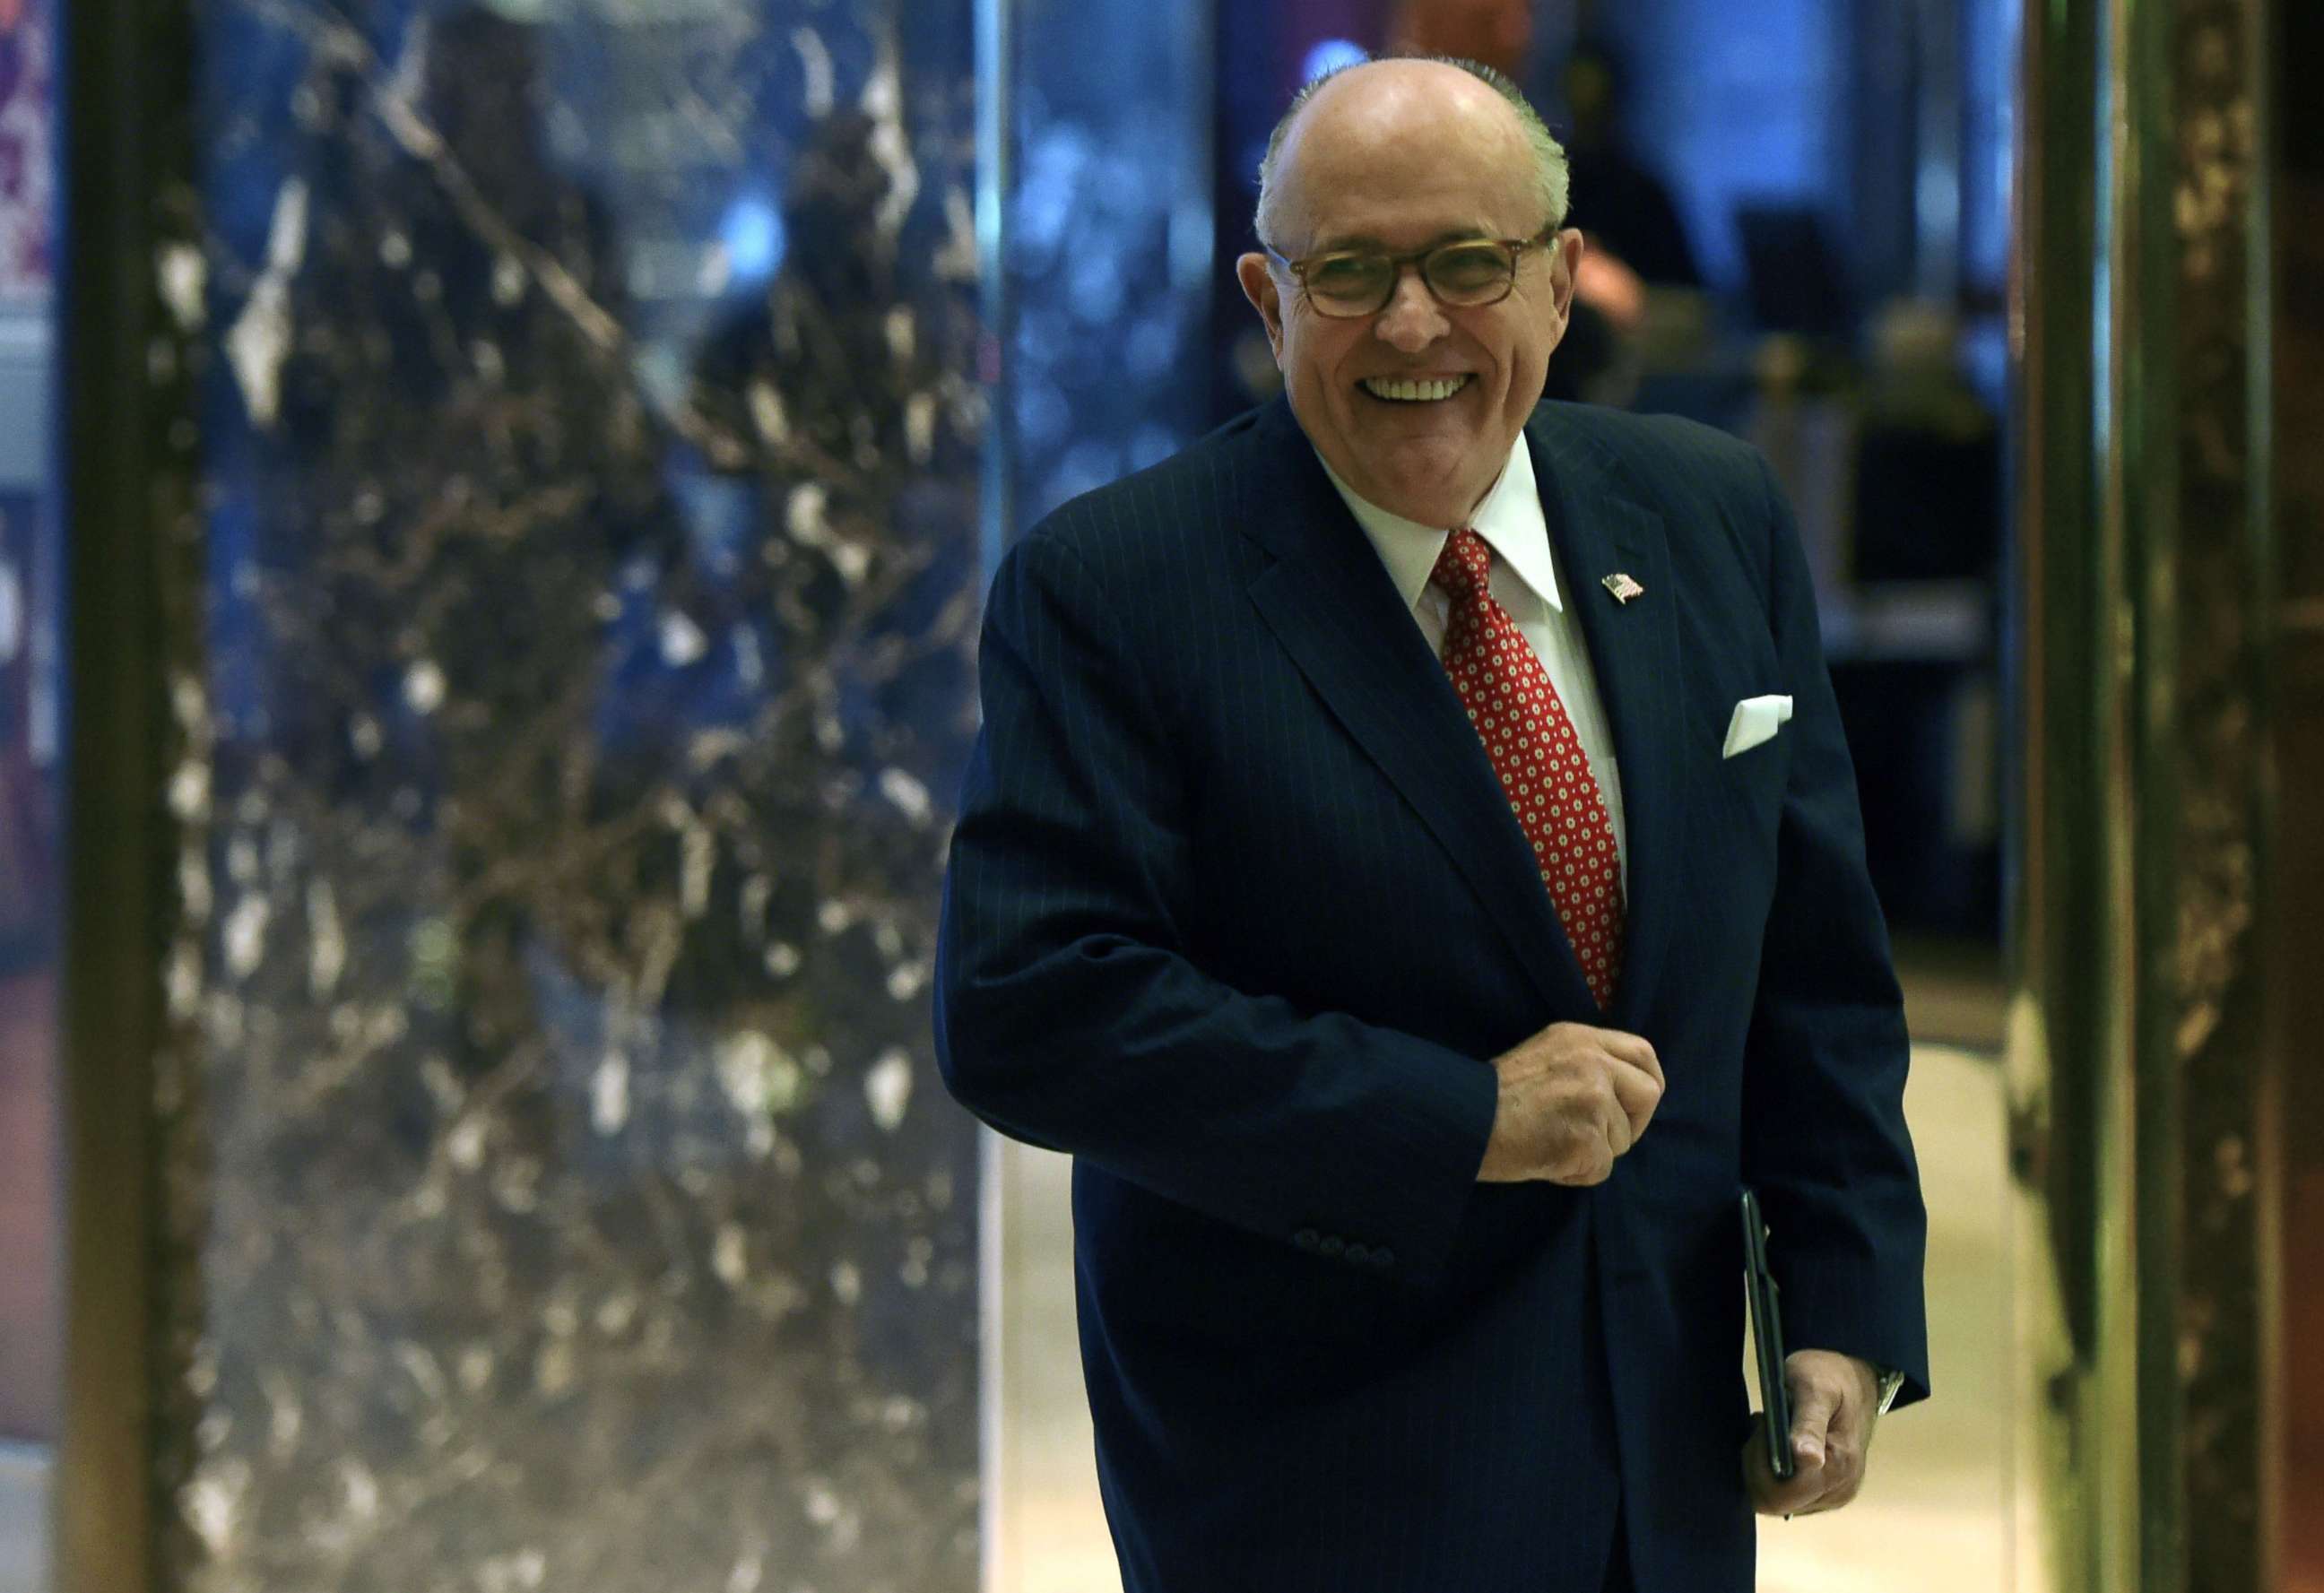 PHOTO: In this file photo taken on Nov. 22, 2016, former New York City Mayor Rudy Giuliani arrives at Trump Tower on another day of meetings for President-elect Donald Trump in New York.